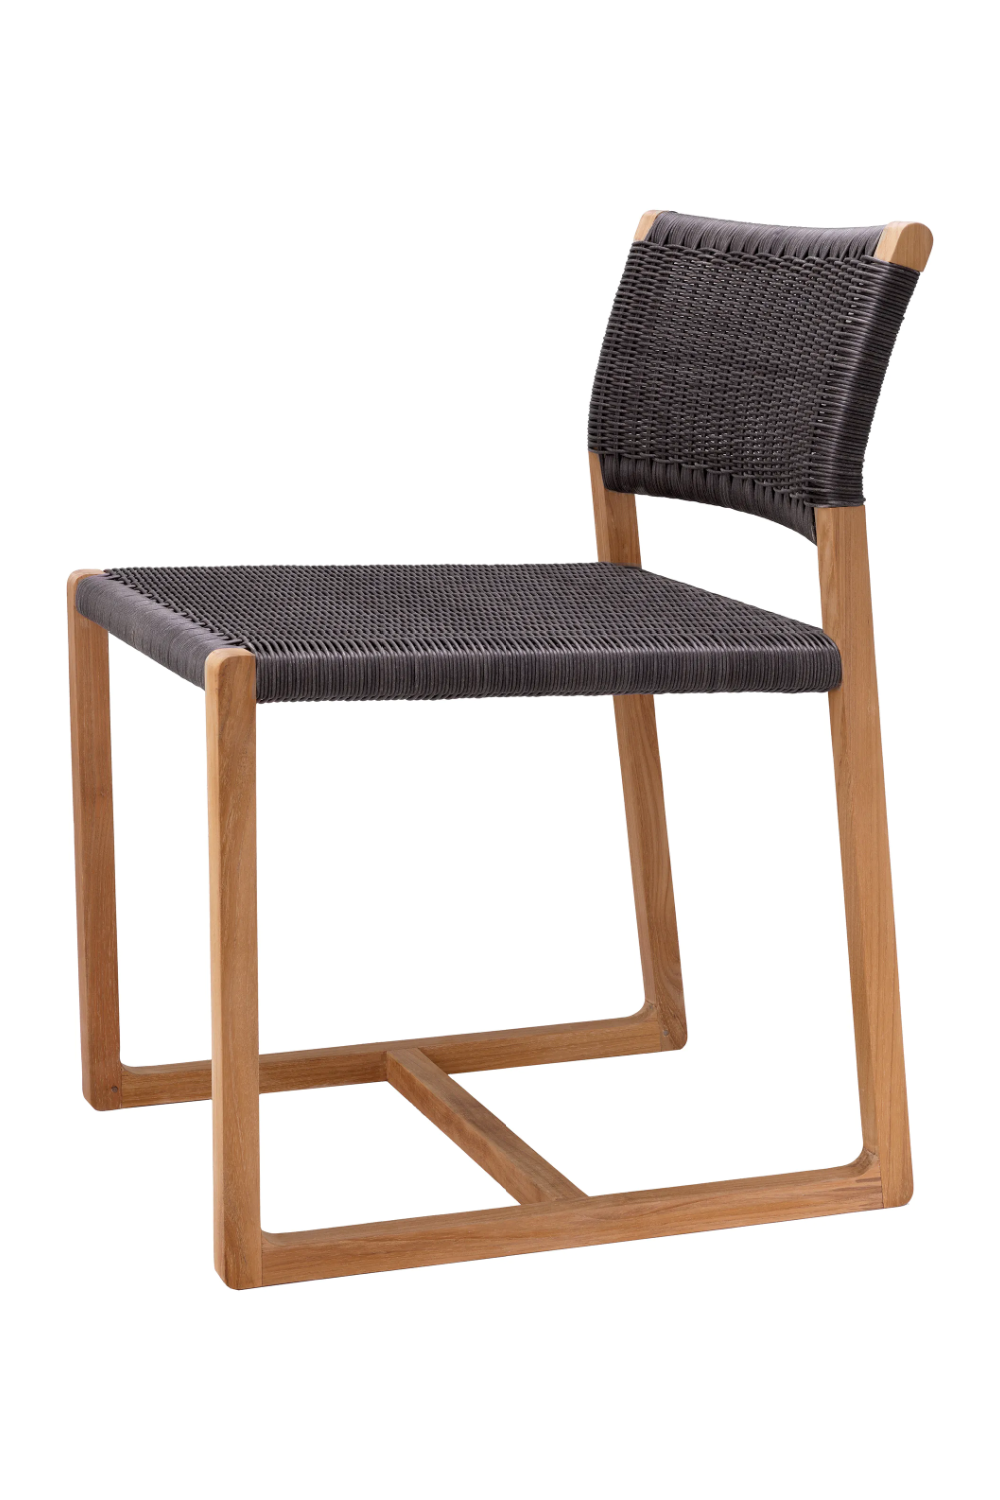 Wooden Weave Outdoor Dining Chair | Eichholtz Griffin | Oroa.com